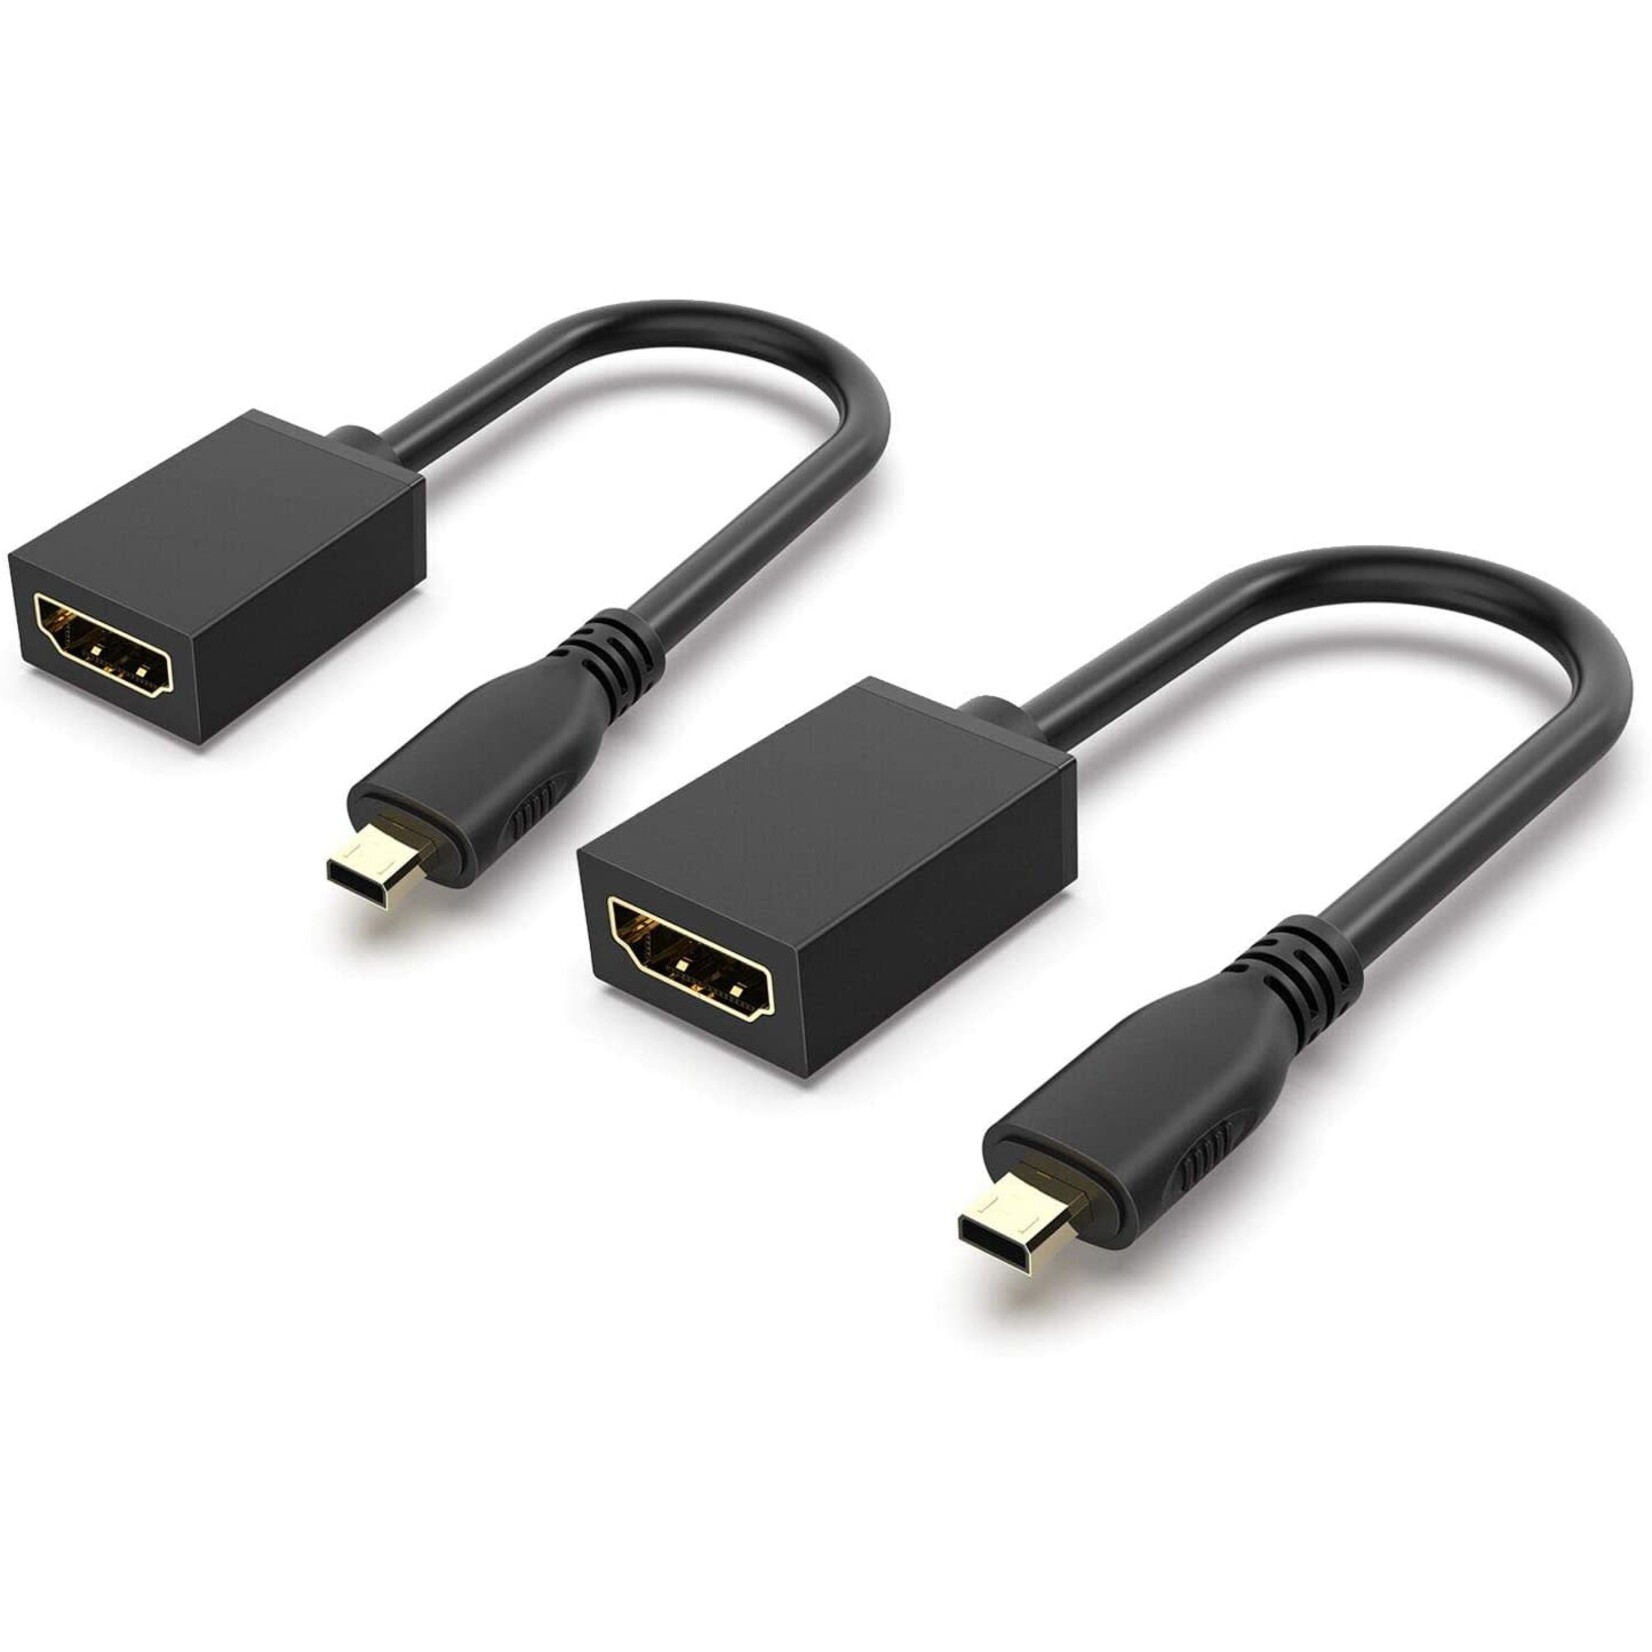 Not specified Micro HDMI to HDMI Adapter Cable, Micro HDMI to HDMI Cable (Male to Female) for Gopro Hero and Other Action Camera/Cam with 4K/3D Supported